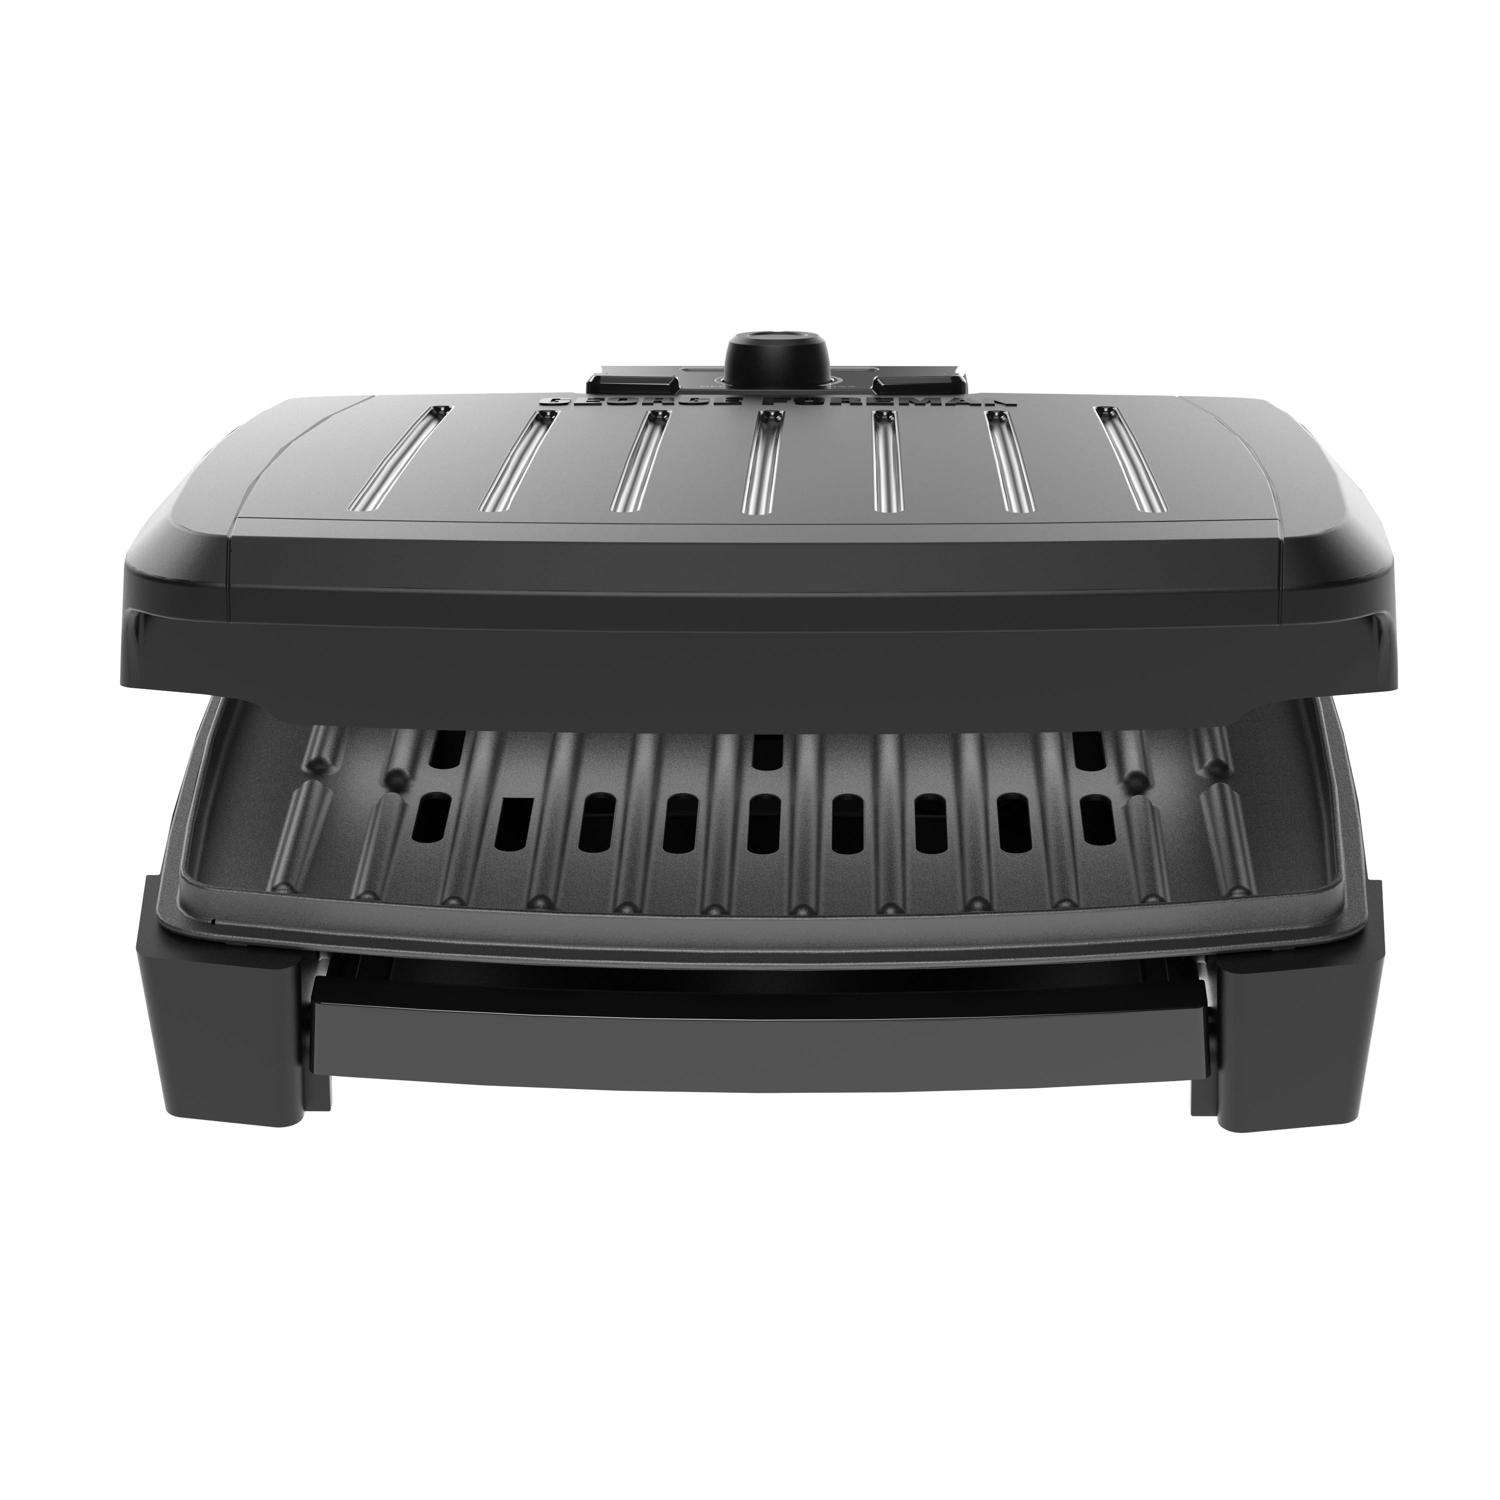 George Foreman 5 Serving 7-in-1 Grill & Broil w/ Nonstick Plates 